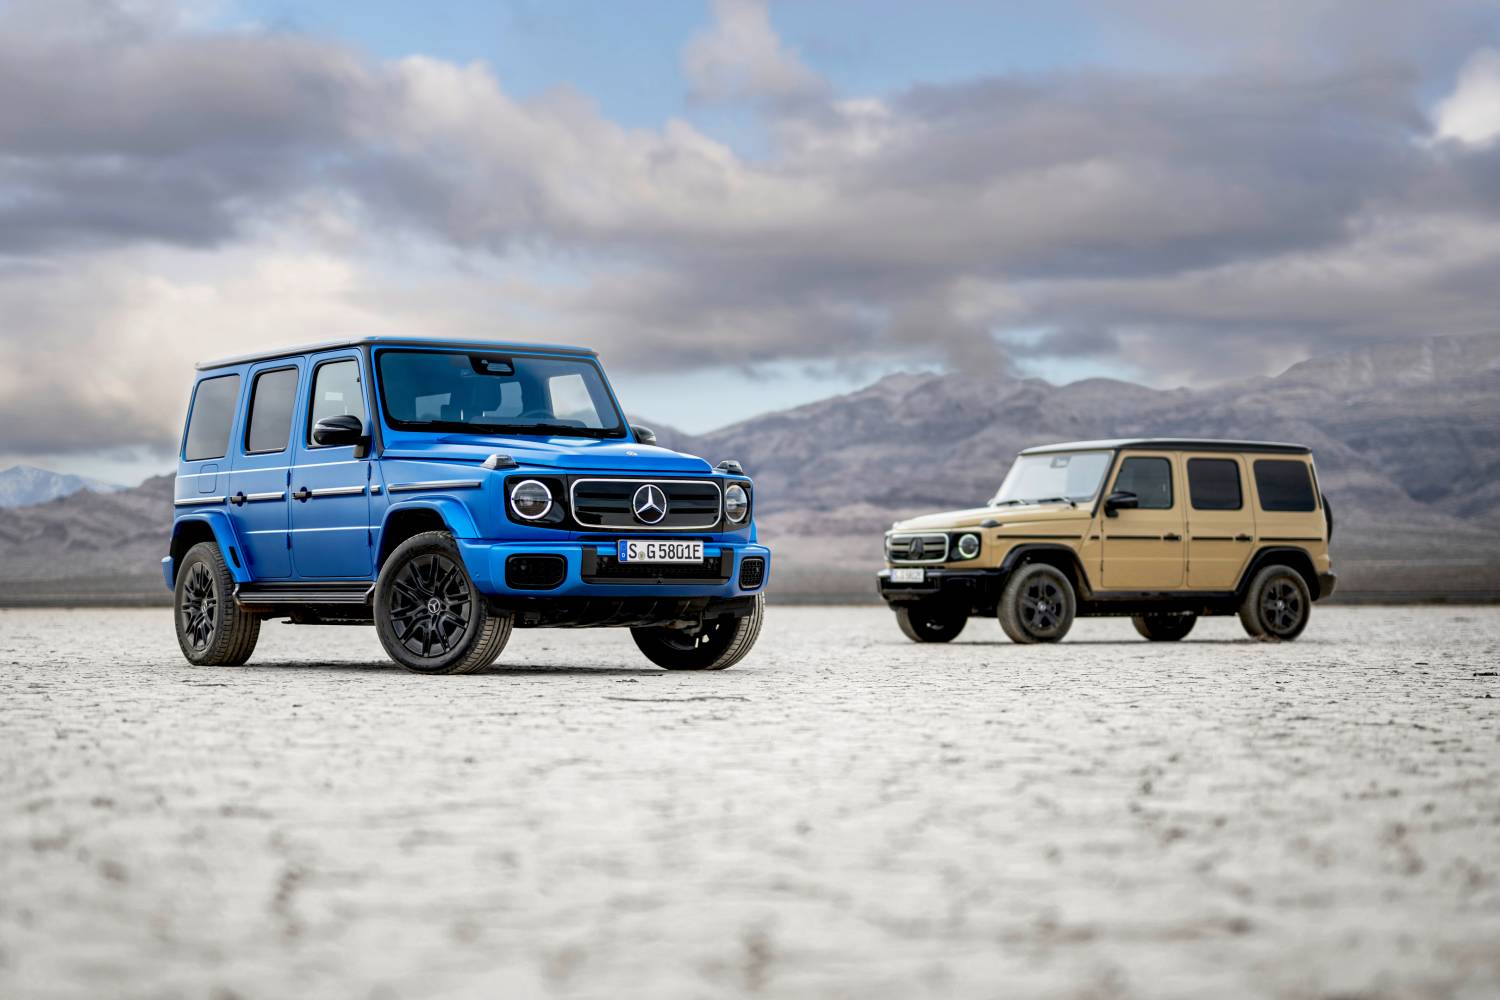 Mercedes-Benz unveils the G 580 with EQ Technology, the first fully electric G-Class, combining traditional ruggedness with modern efficiency and zero CO₂ emissions.